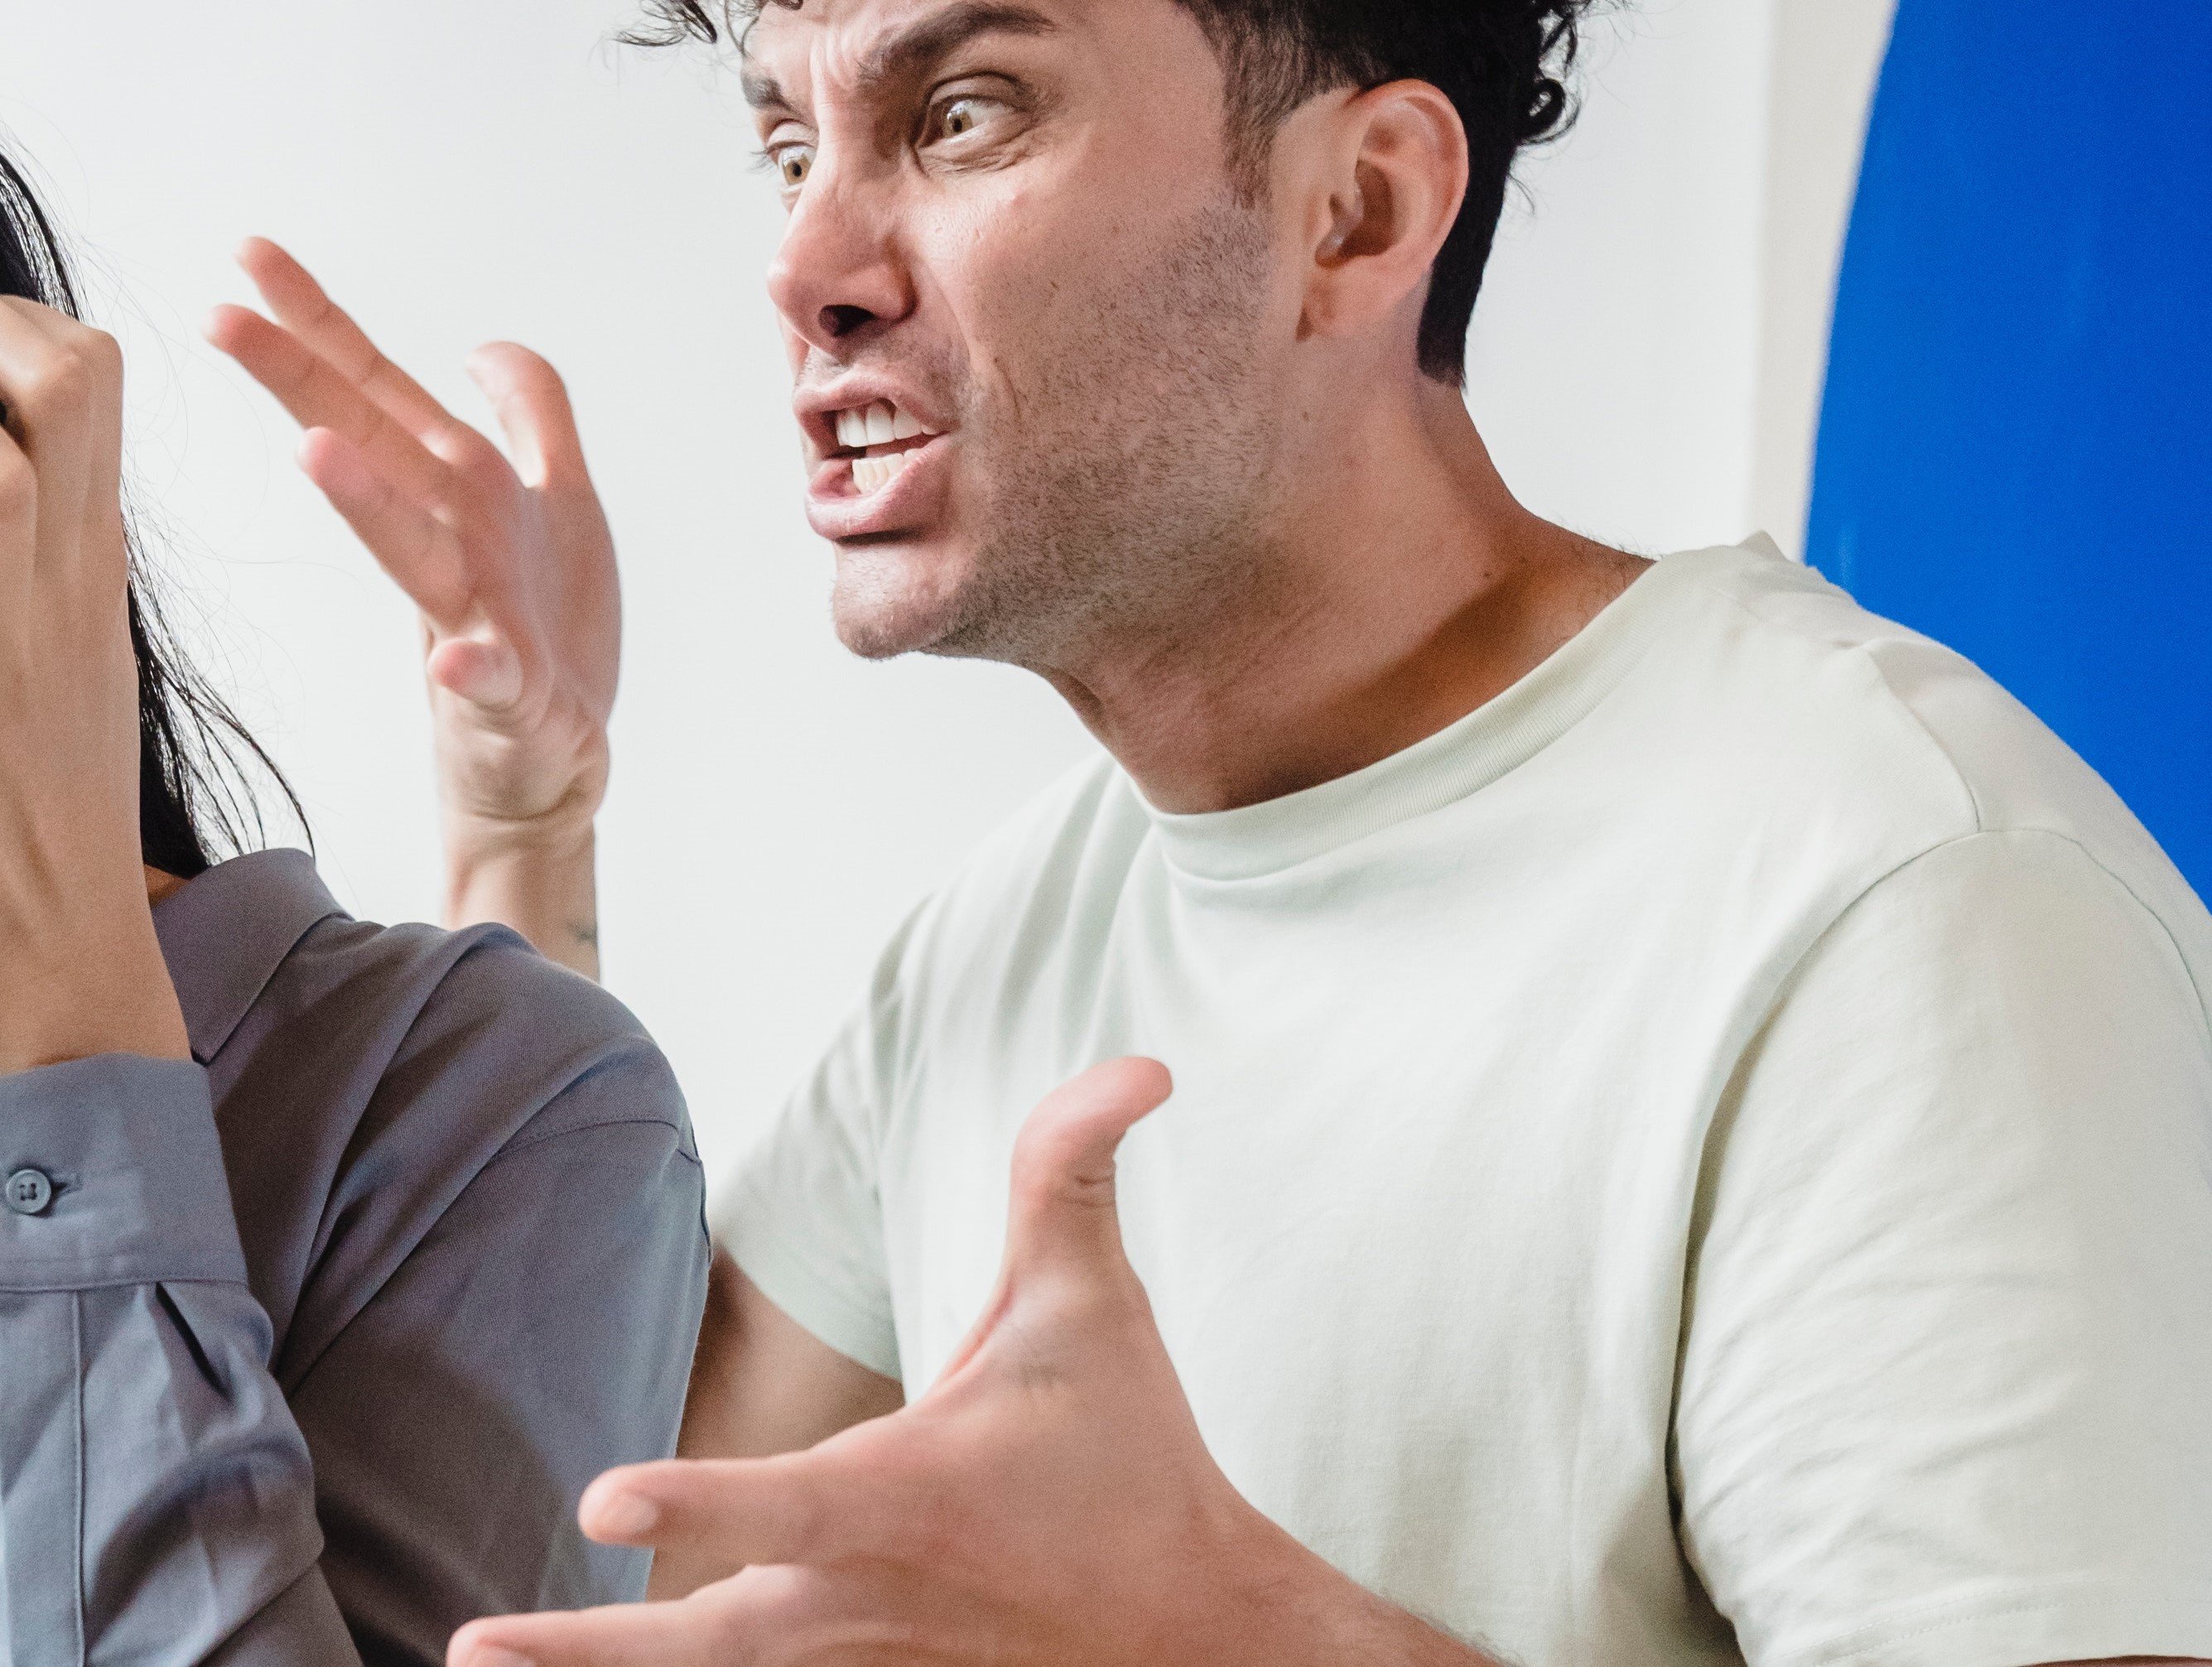 A husband shouting at his wife | Source: Pexels